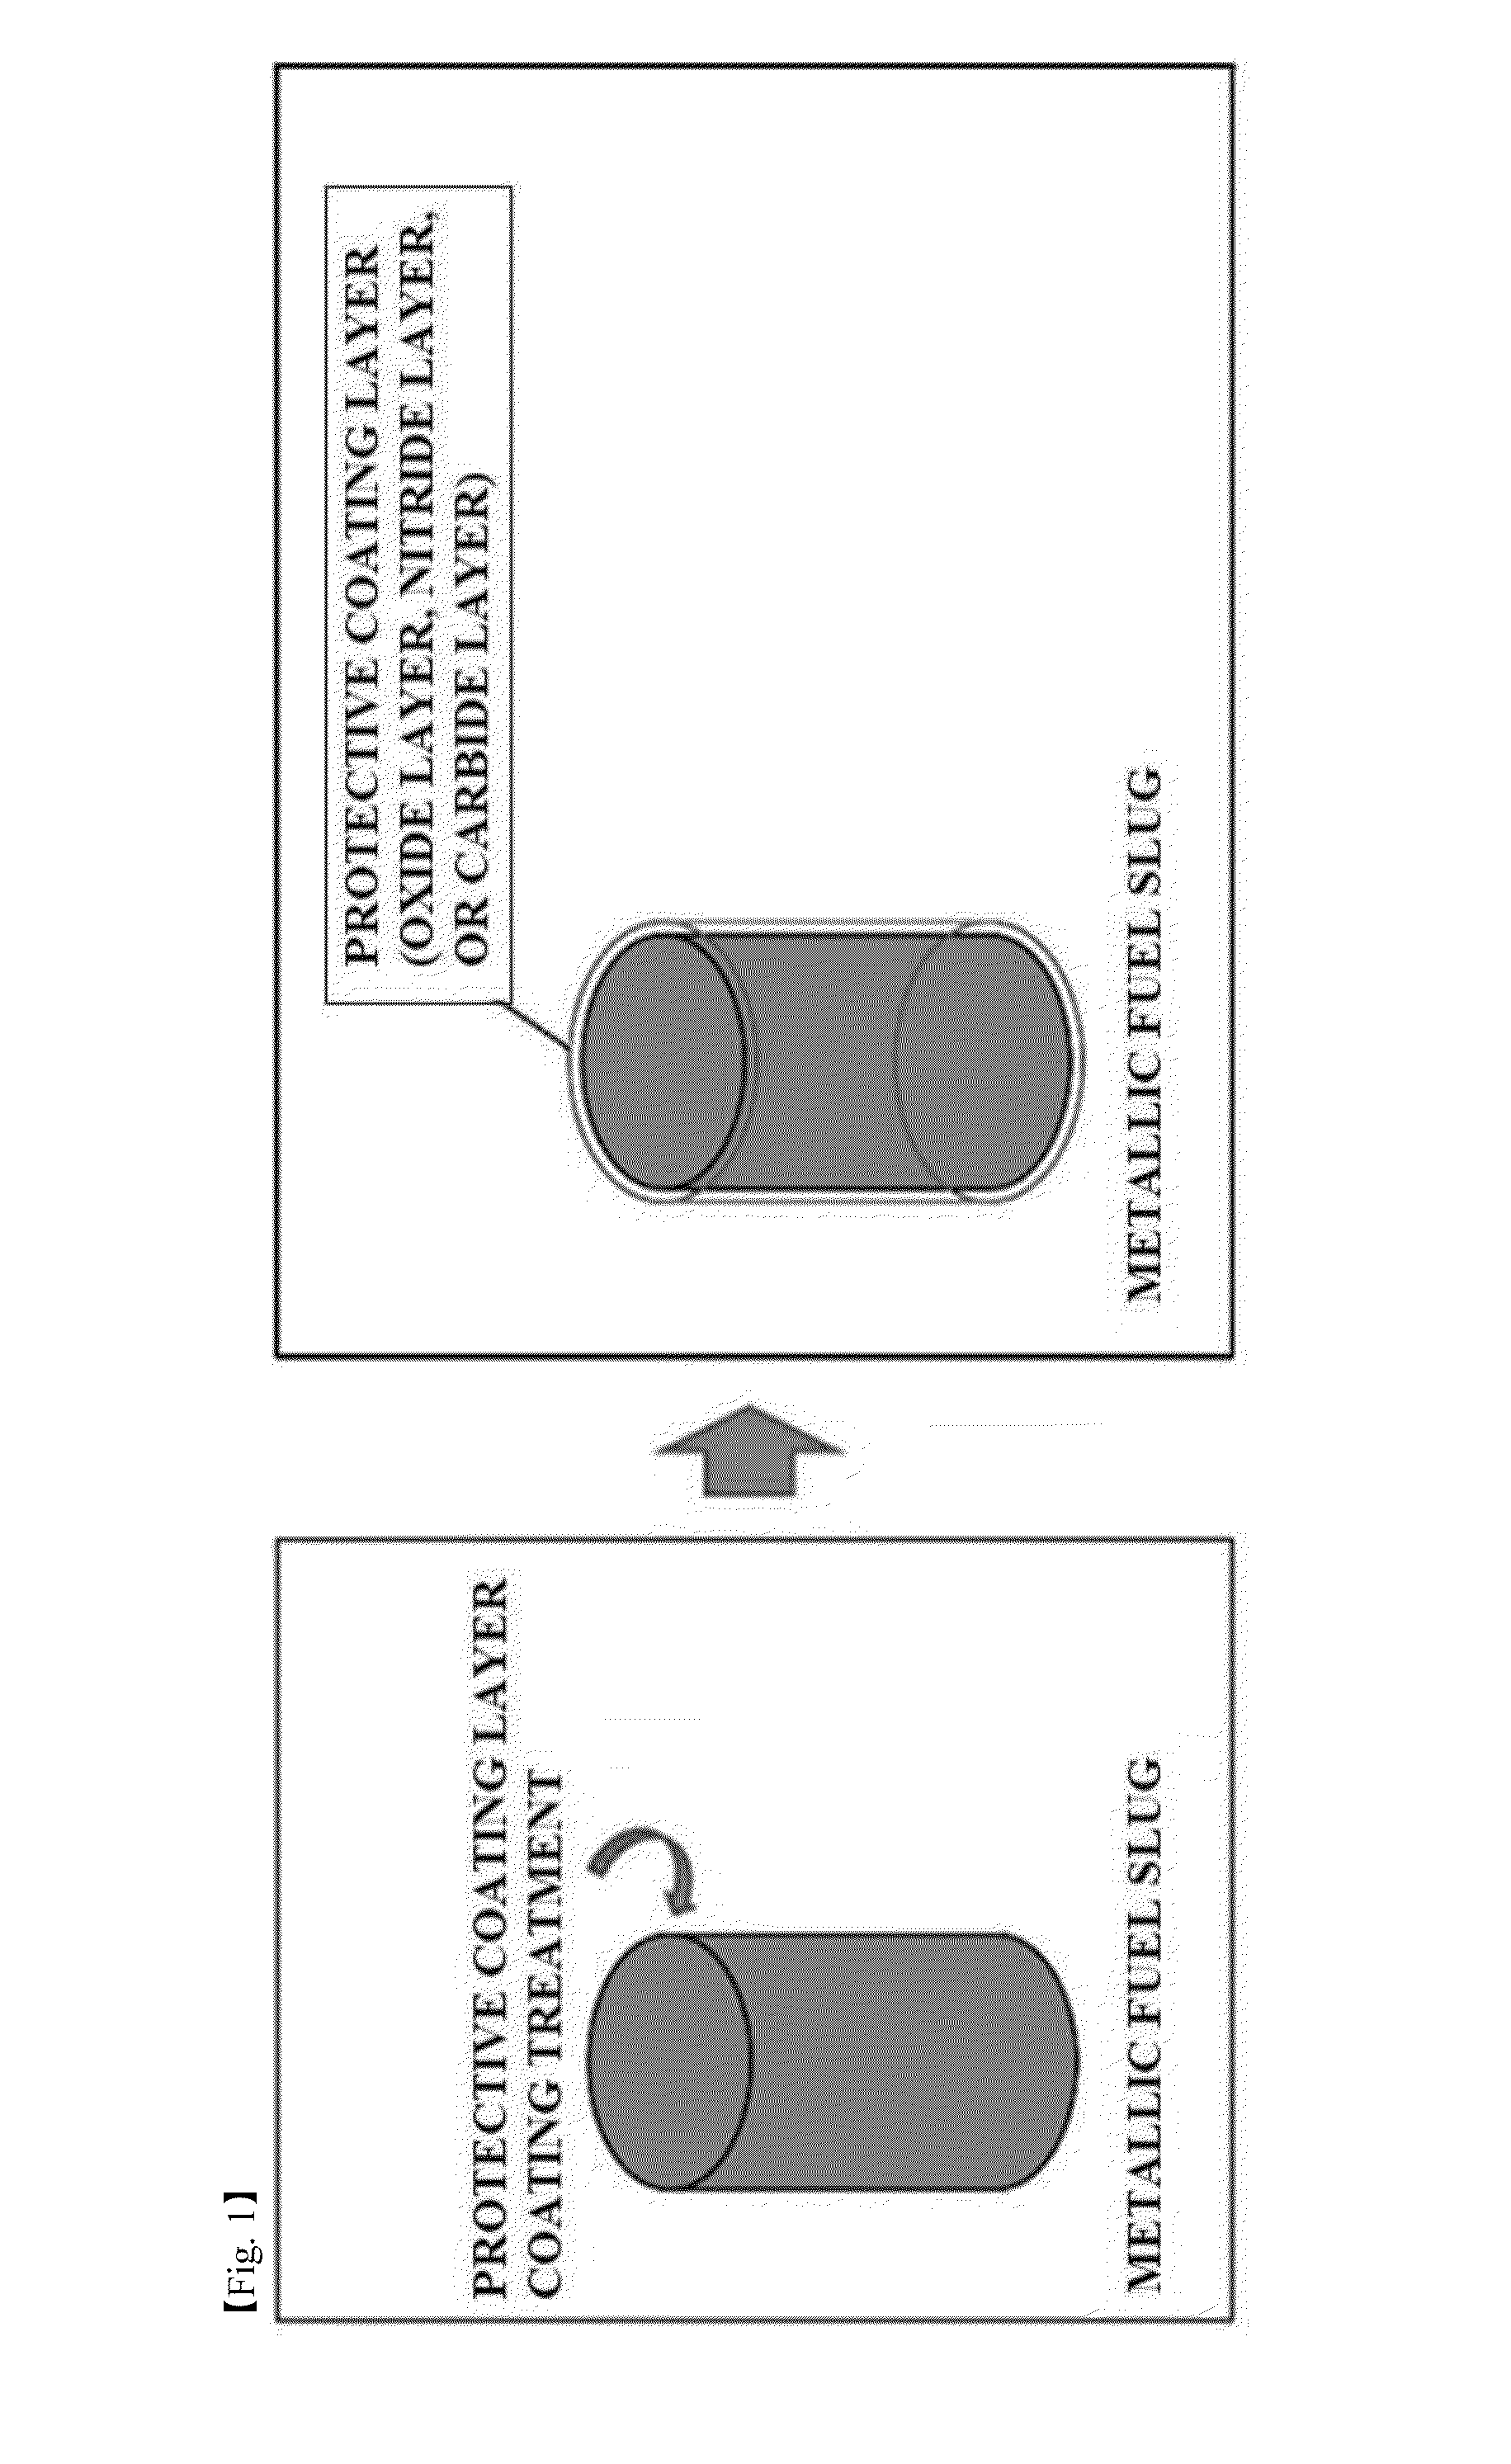 Nuclear fuel rod for fast reactors including metallic fuel slug coated with protective coating layer and fabrication method thereof